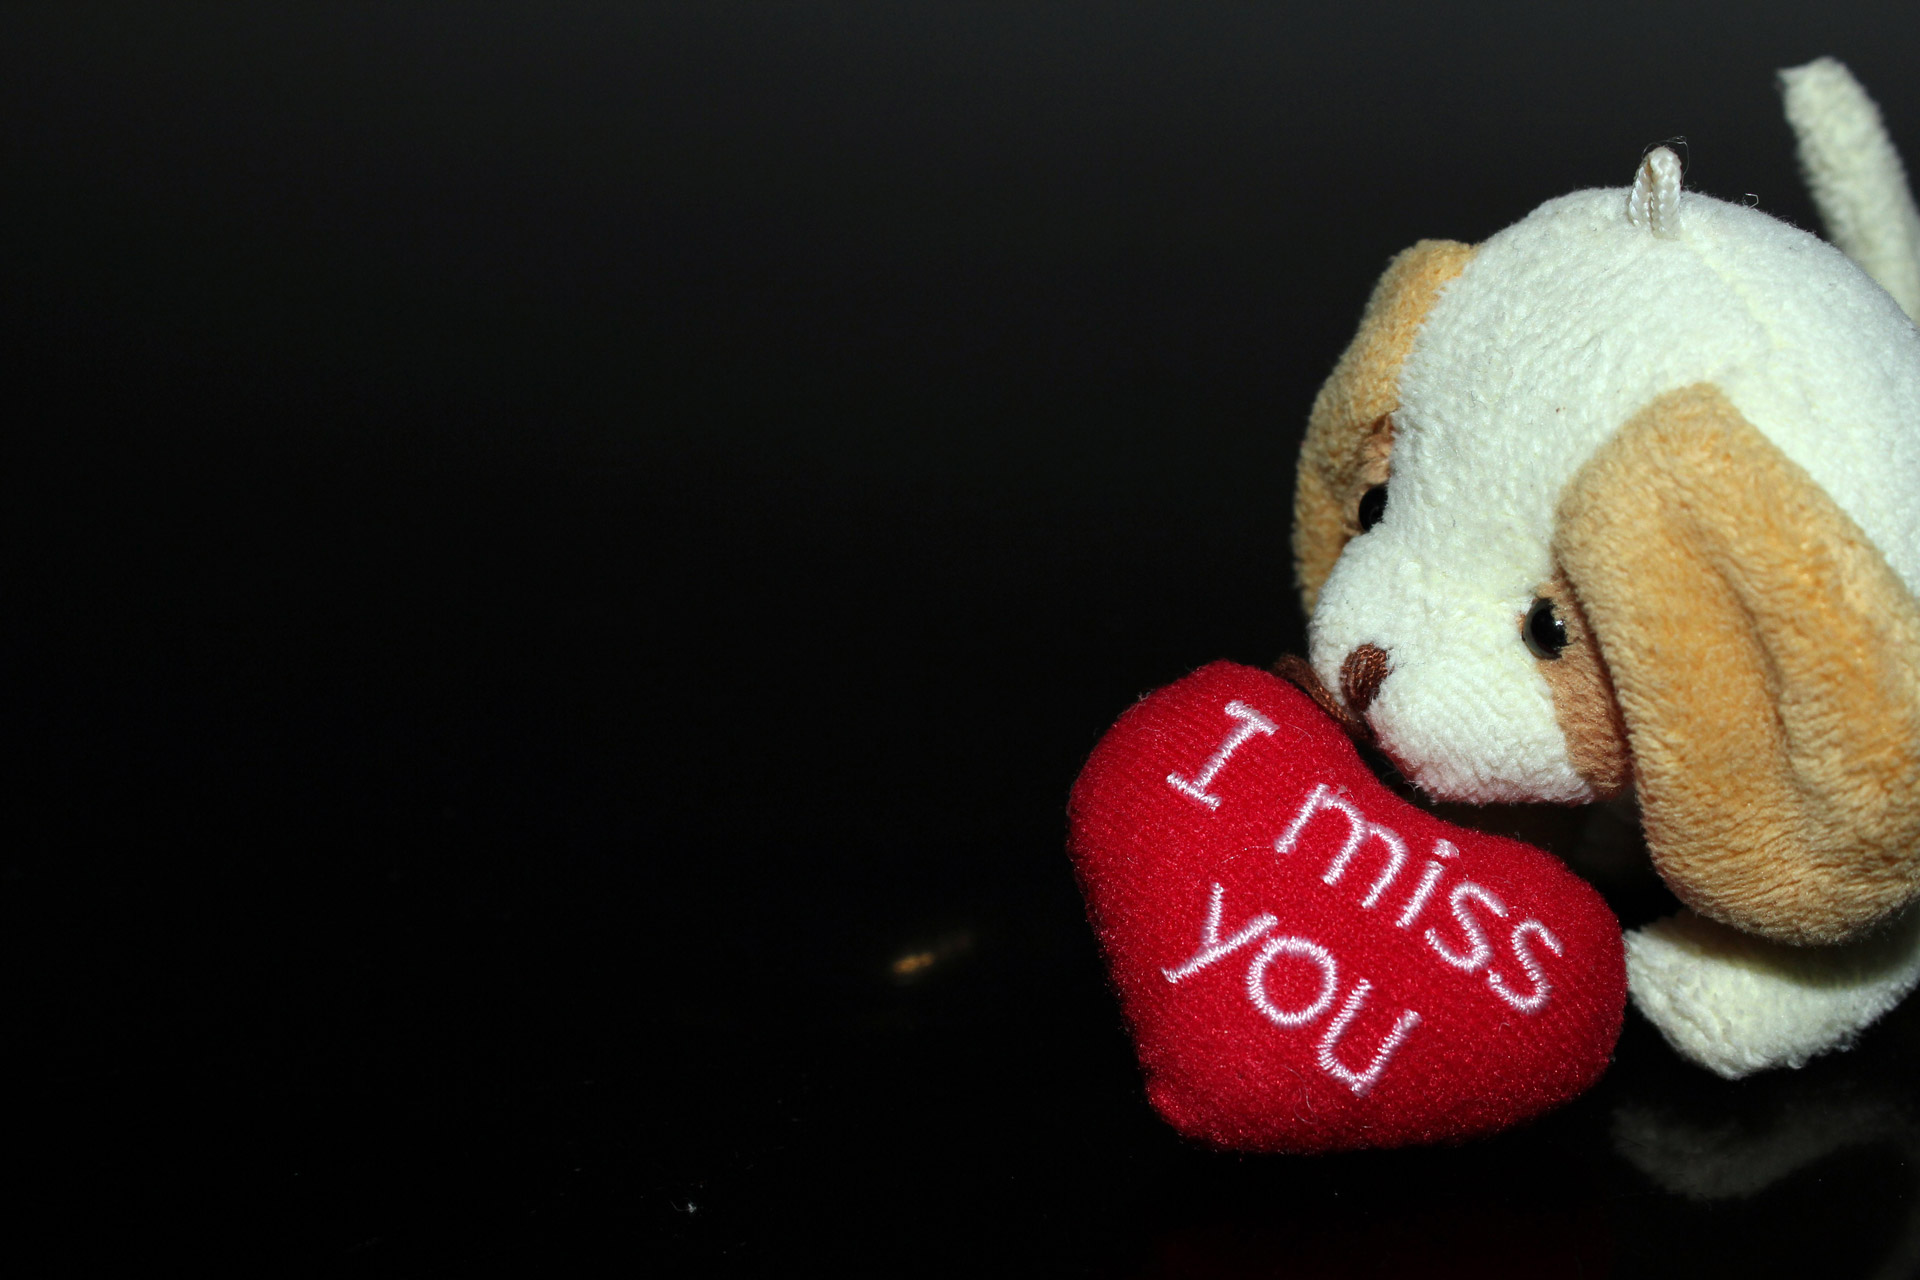 I Miss You Free Stock Photo - Public Domain Pictures